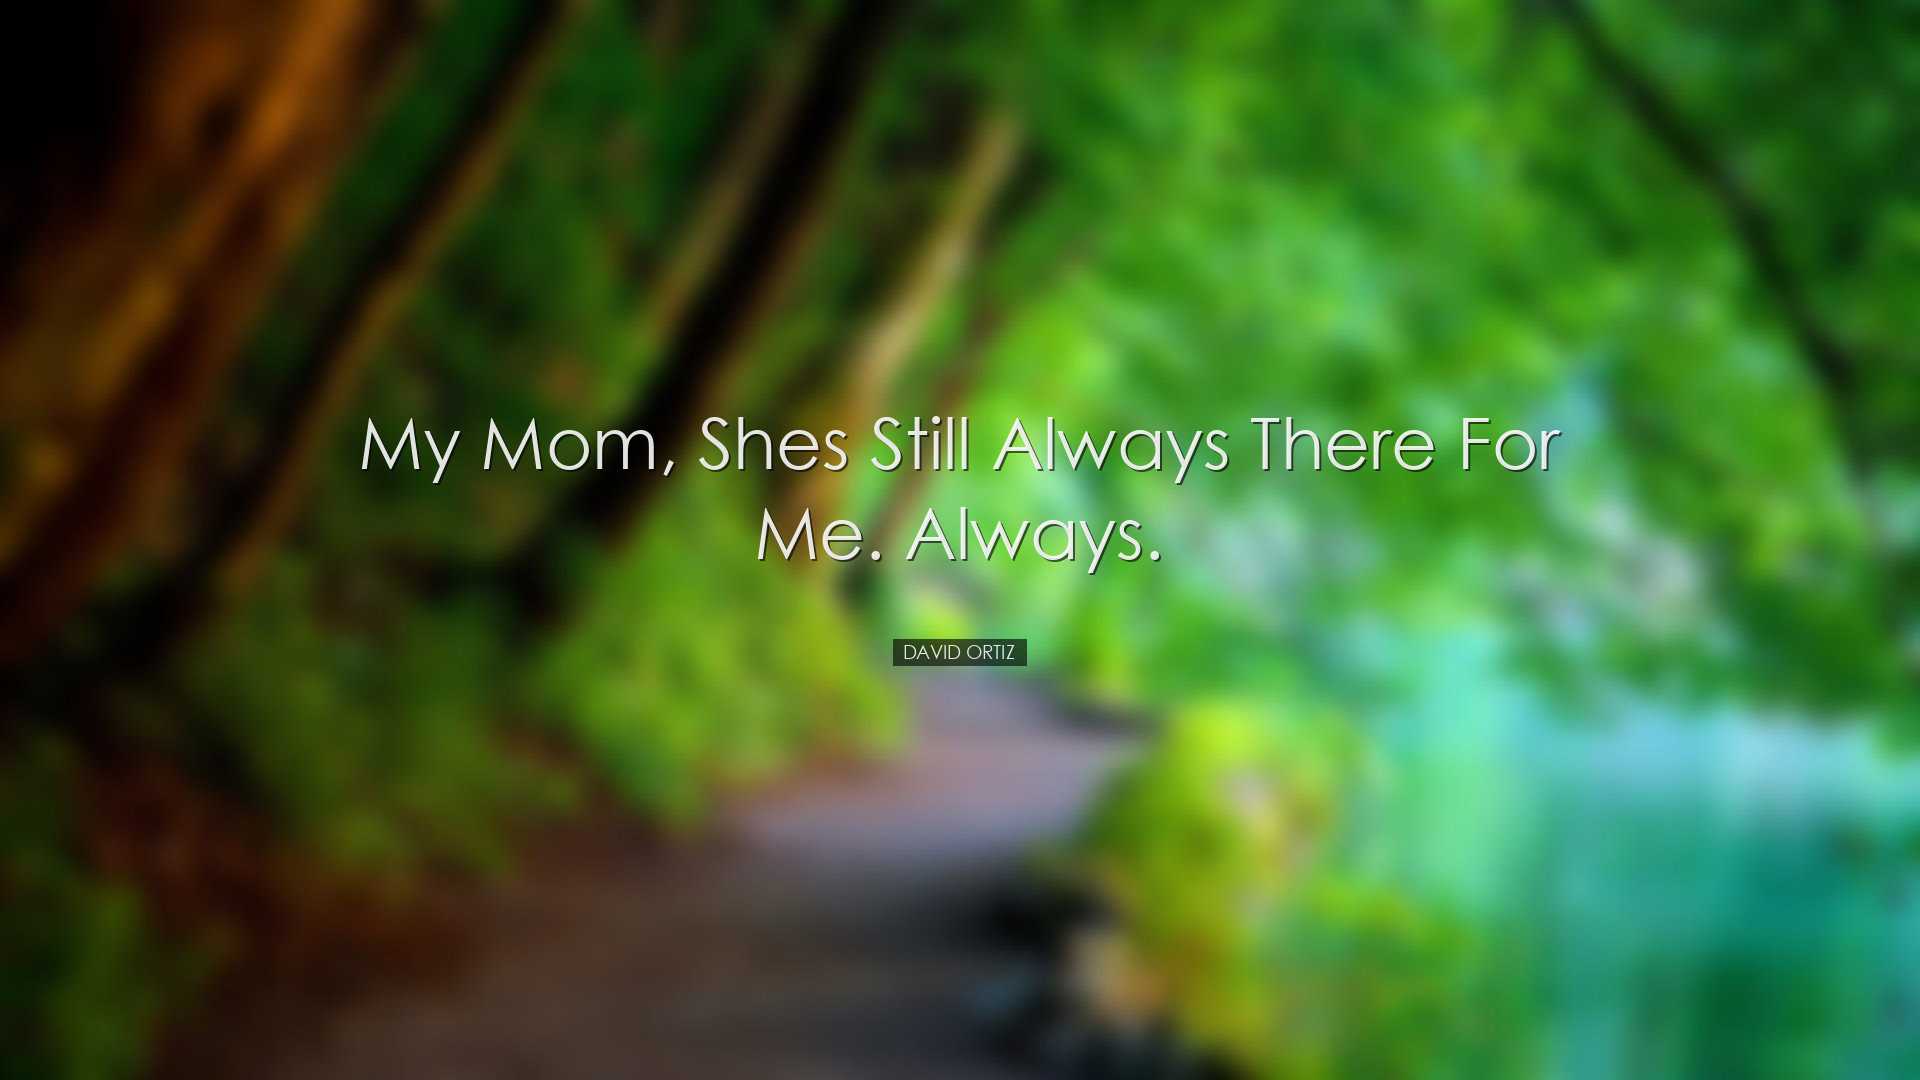 My mom, shes still always there for me. Always. - David Ortiz